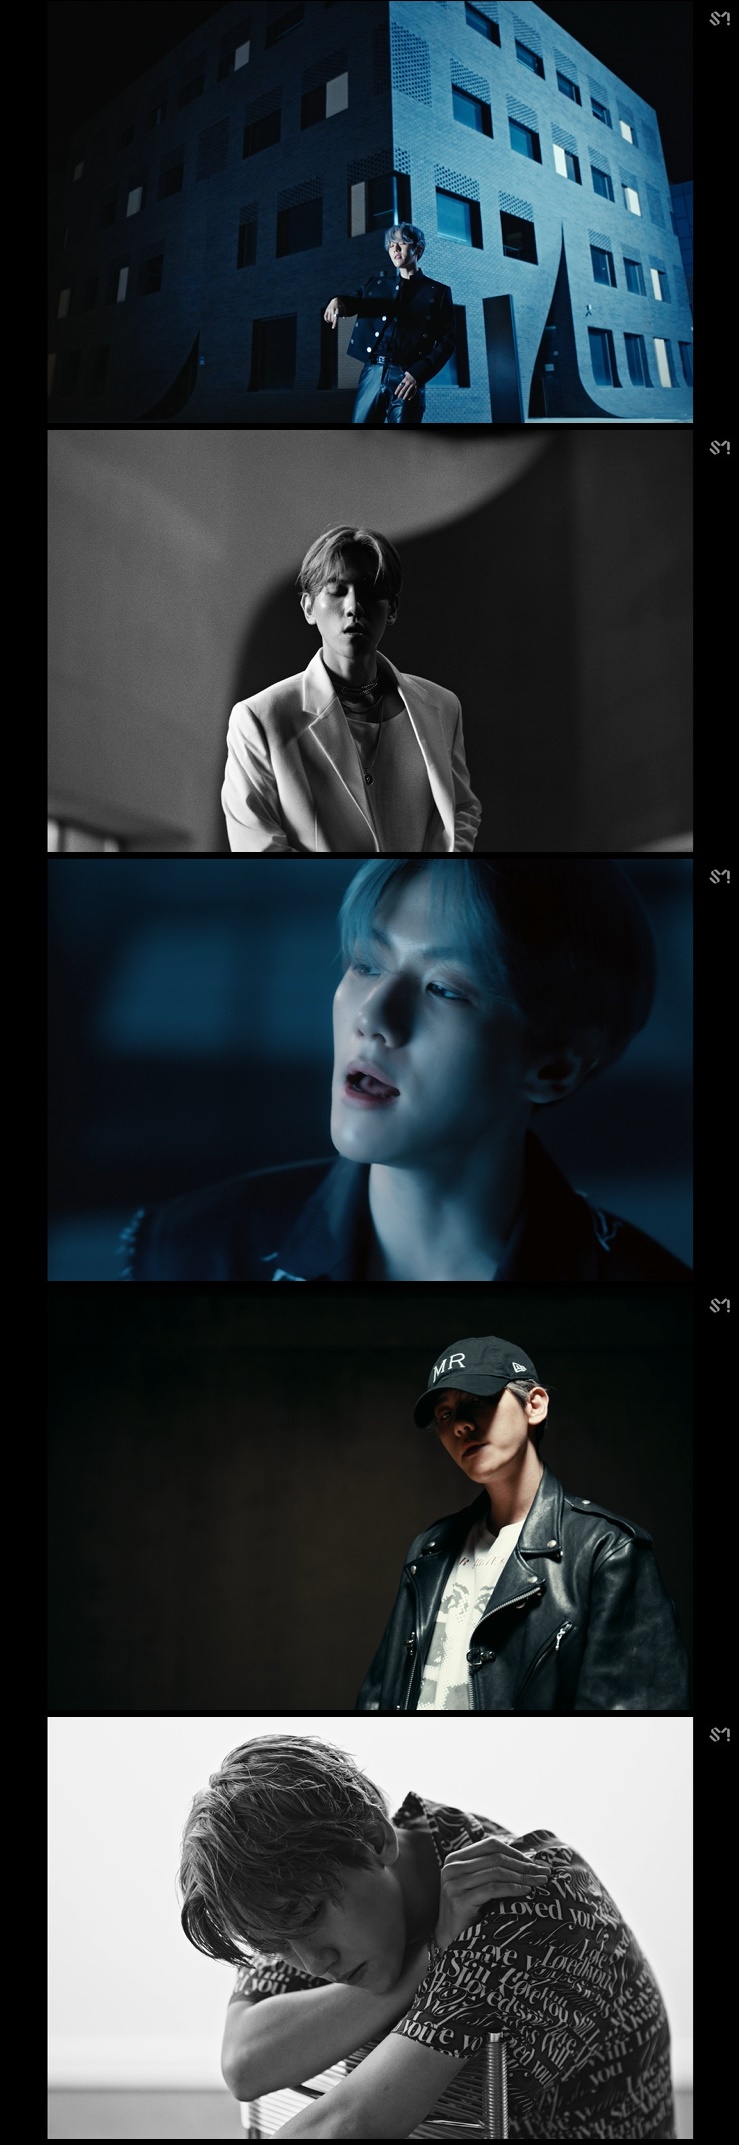 EXO Baekhyun returns to romantic love song that inspires female heartBaekhyun released his first mini album City Lights soundtrack and the title song United Nations Village music video on various music sites at 6 p.m. on July 10.Since his debut in 2012, Baekhyun, who has participated in a number of OSTs and collaborations, including EXO, Unit EXO - Chenbaxi (Chen, Baekhyun, Siu Min), has attempted to transform himself by releasing his first solo album in seven years of his debut.The first solo album, which also melted Light, which symbolizes Baekhyun, into the title of the album, included a total of six songs, including the title song United Nations Village.Baekhyun, who has grown steadily, has once again expanded his spectrum through this album.Among them, the title song United Nations Village is an R & B song that combines grooved beats and string sounds, and new producers Leon and Dress worked.Through vocal training, which started again from the beginning of solo work, the tone deepened, and the musical color was not found in previous activities.If EXO songs have followed somewhat fantasy and metaphorical lyrics, United Nations Village follows a straightforward expression.Like the lyrics You & me UN Village hill and the moon, United Nations Village is a love song that expresses a romantic time to look at the moon with a lover on a hill like a scene of a movie.Baekhyun used the well-known real name to stimulate peoples curiosity and interest.In addition to the title song, the album also included Stay Up, Betcha, Ice Queen, Diamond, and Psycho, featuring rapper Binzino.Like Baekhyuns desire to be a vocalist who can change his form freely, it was enough to meet the charm as a solo artist Baekhyun.Lee Ha-na